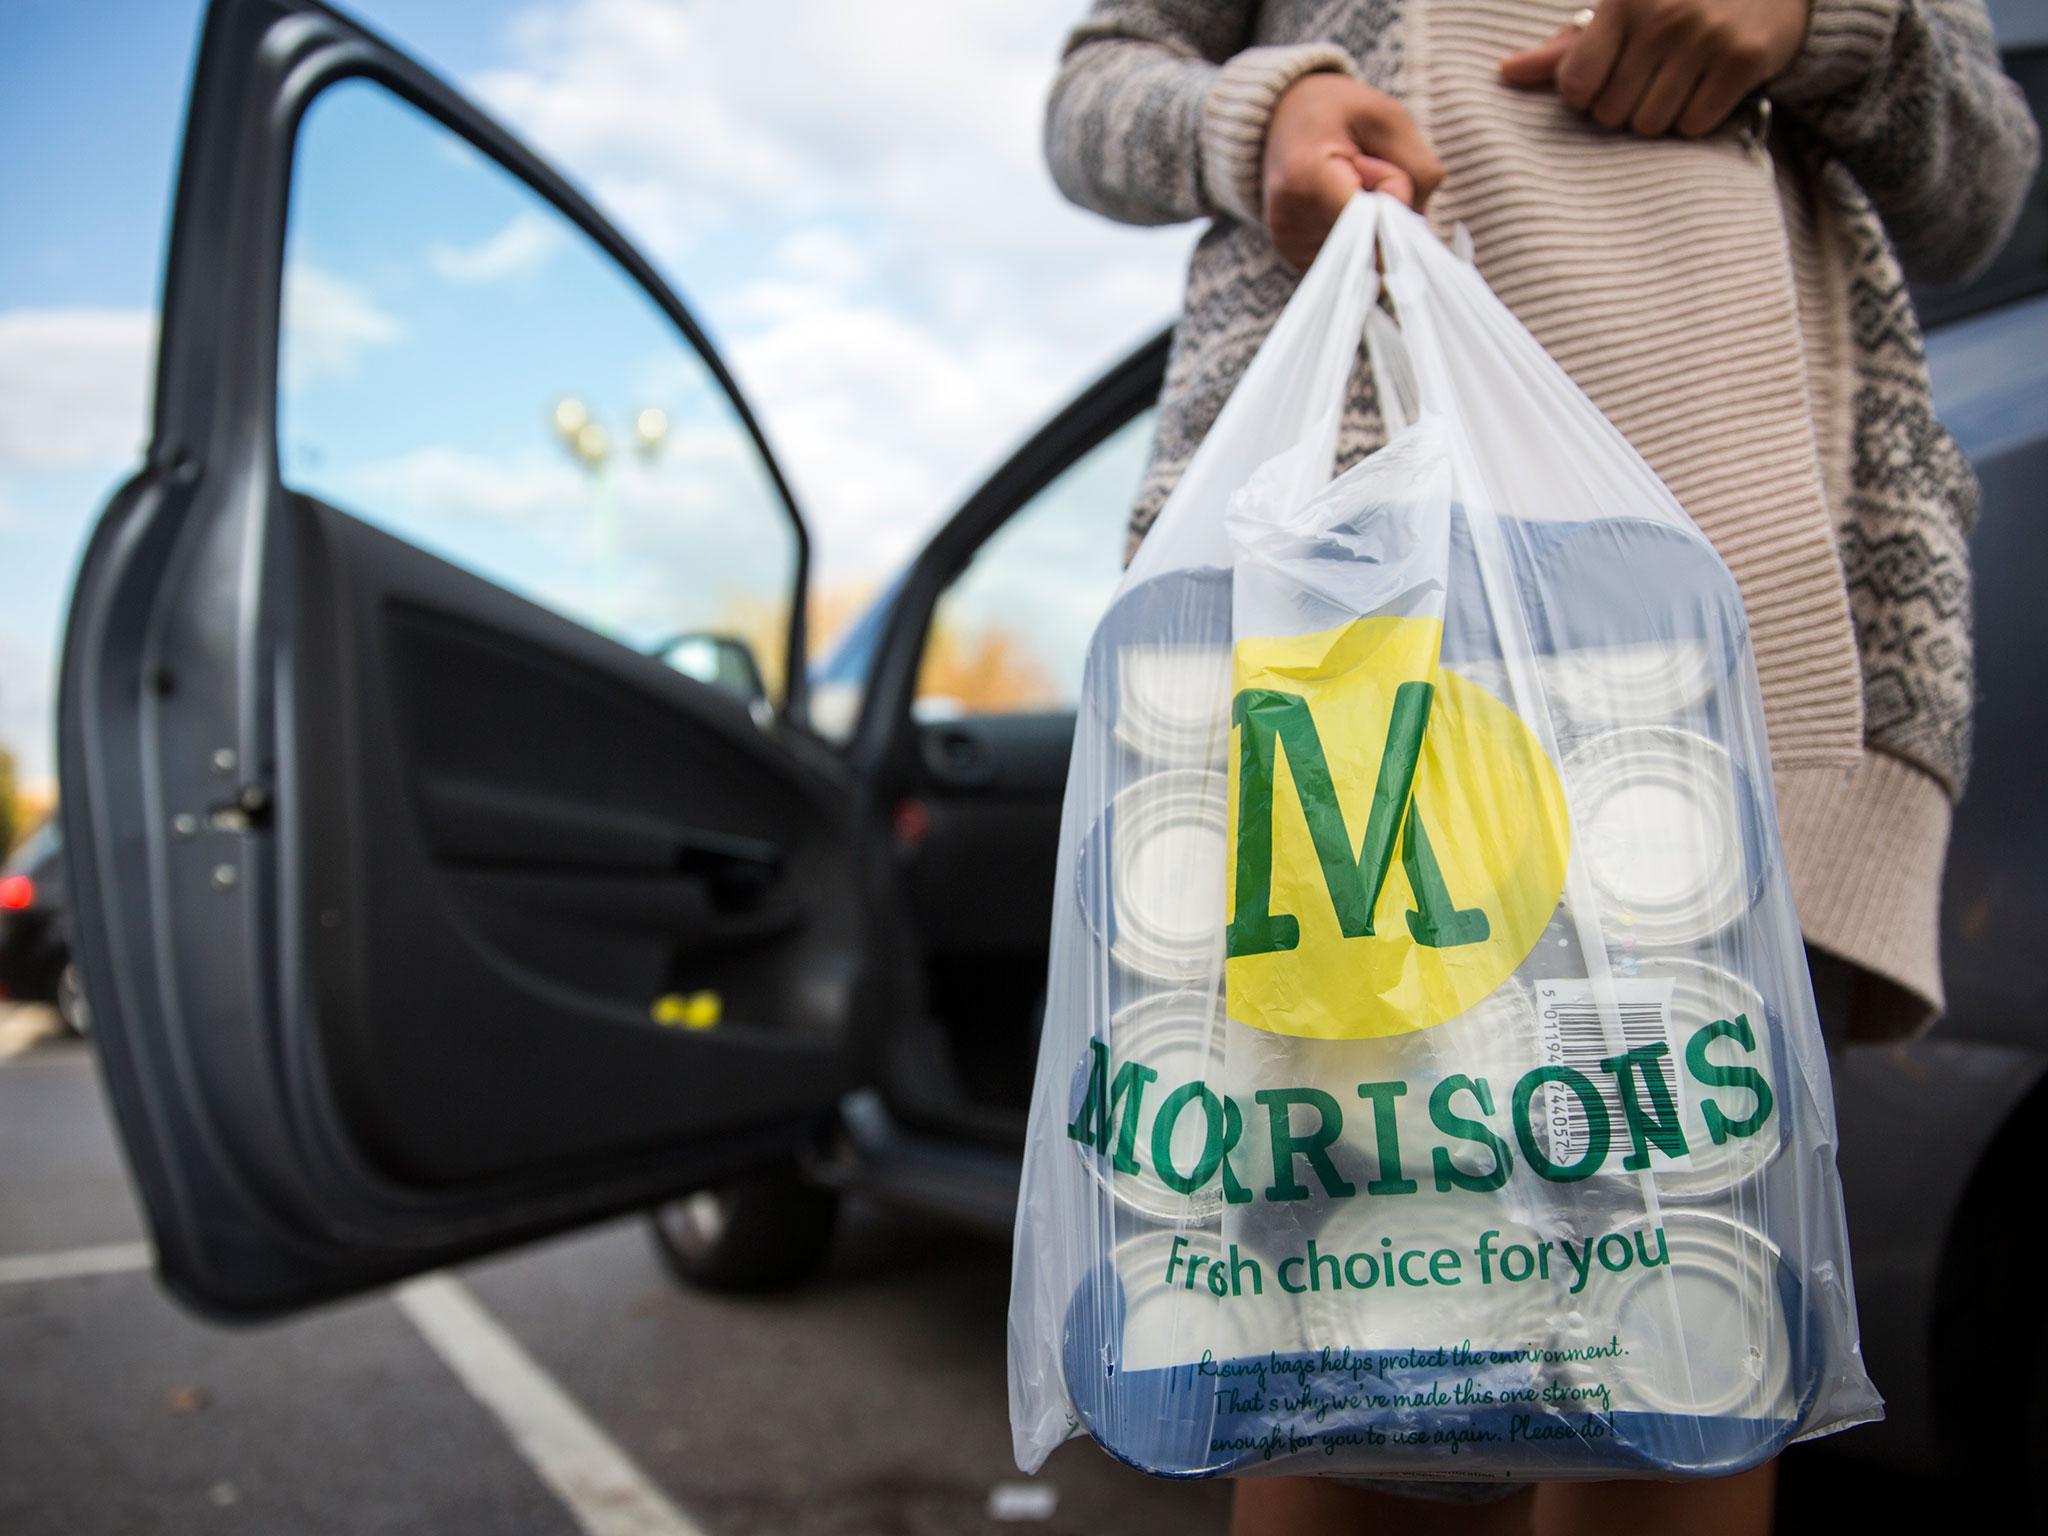 Sales are no longer falling but Morrisons is still battling against the food price deflation that has squeezed profit margins across the industry for the last two years